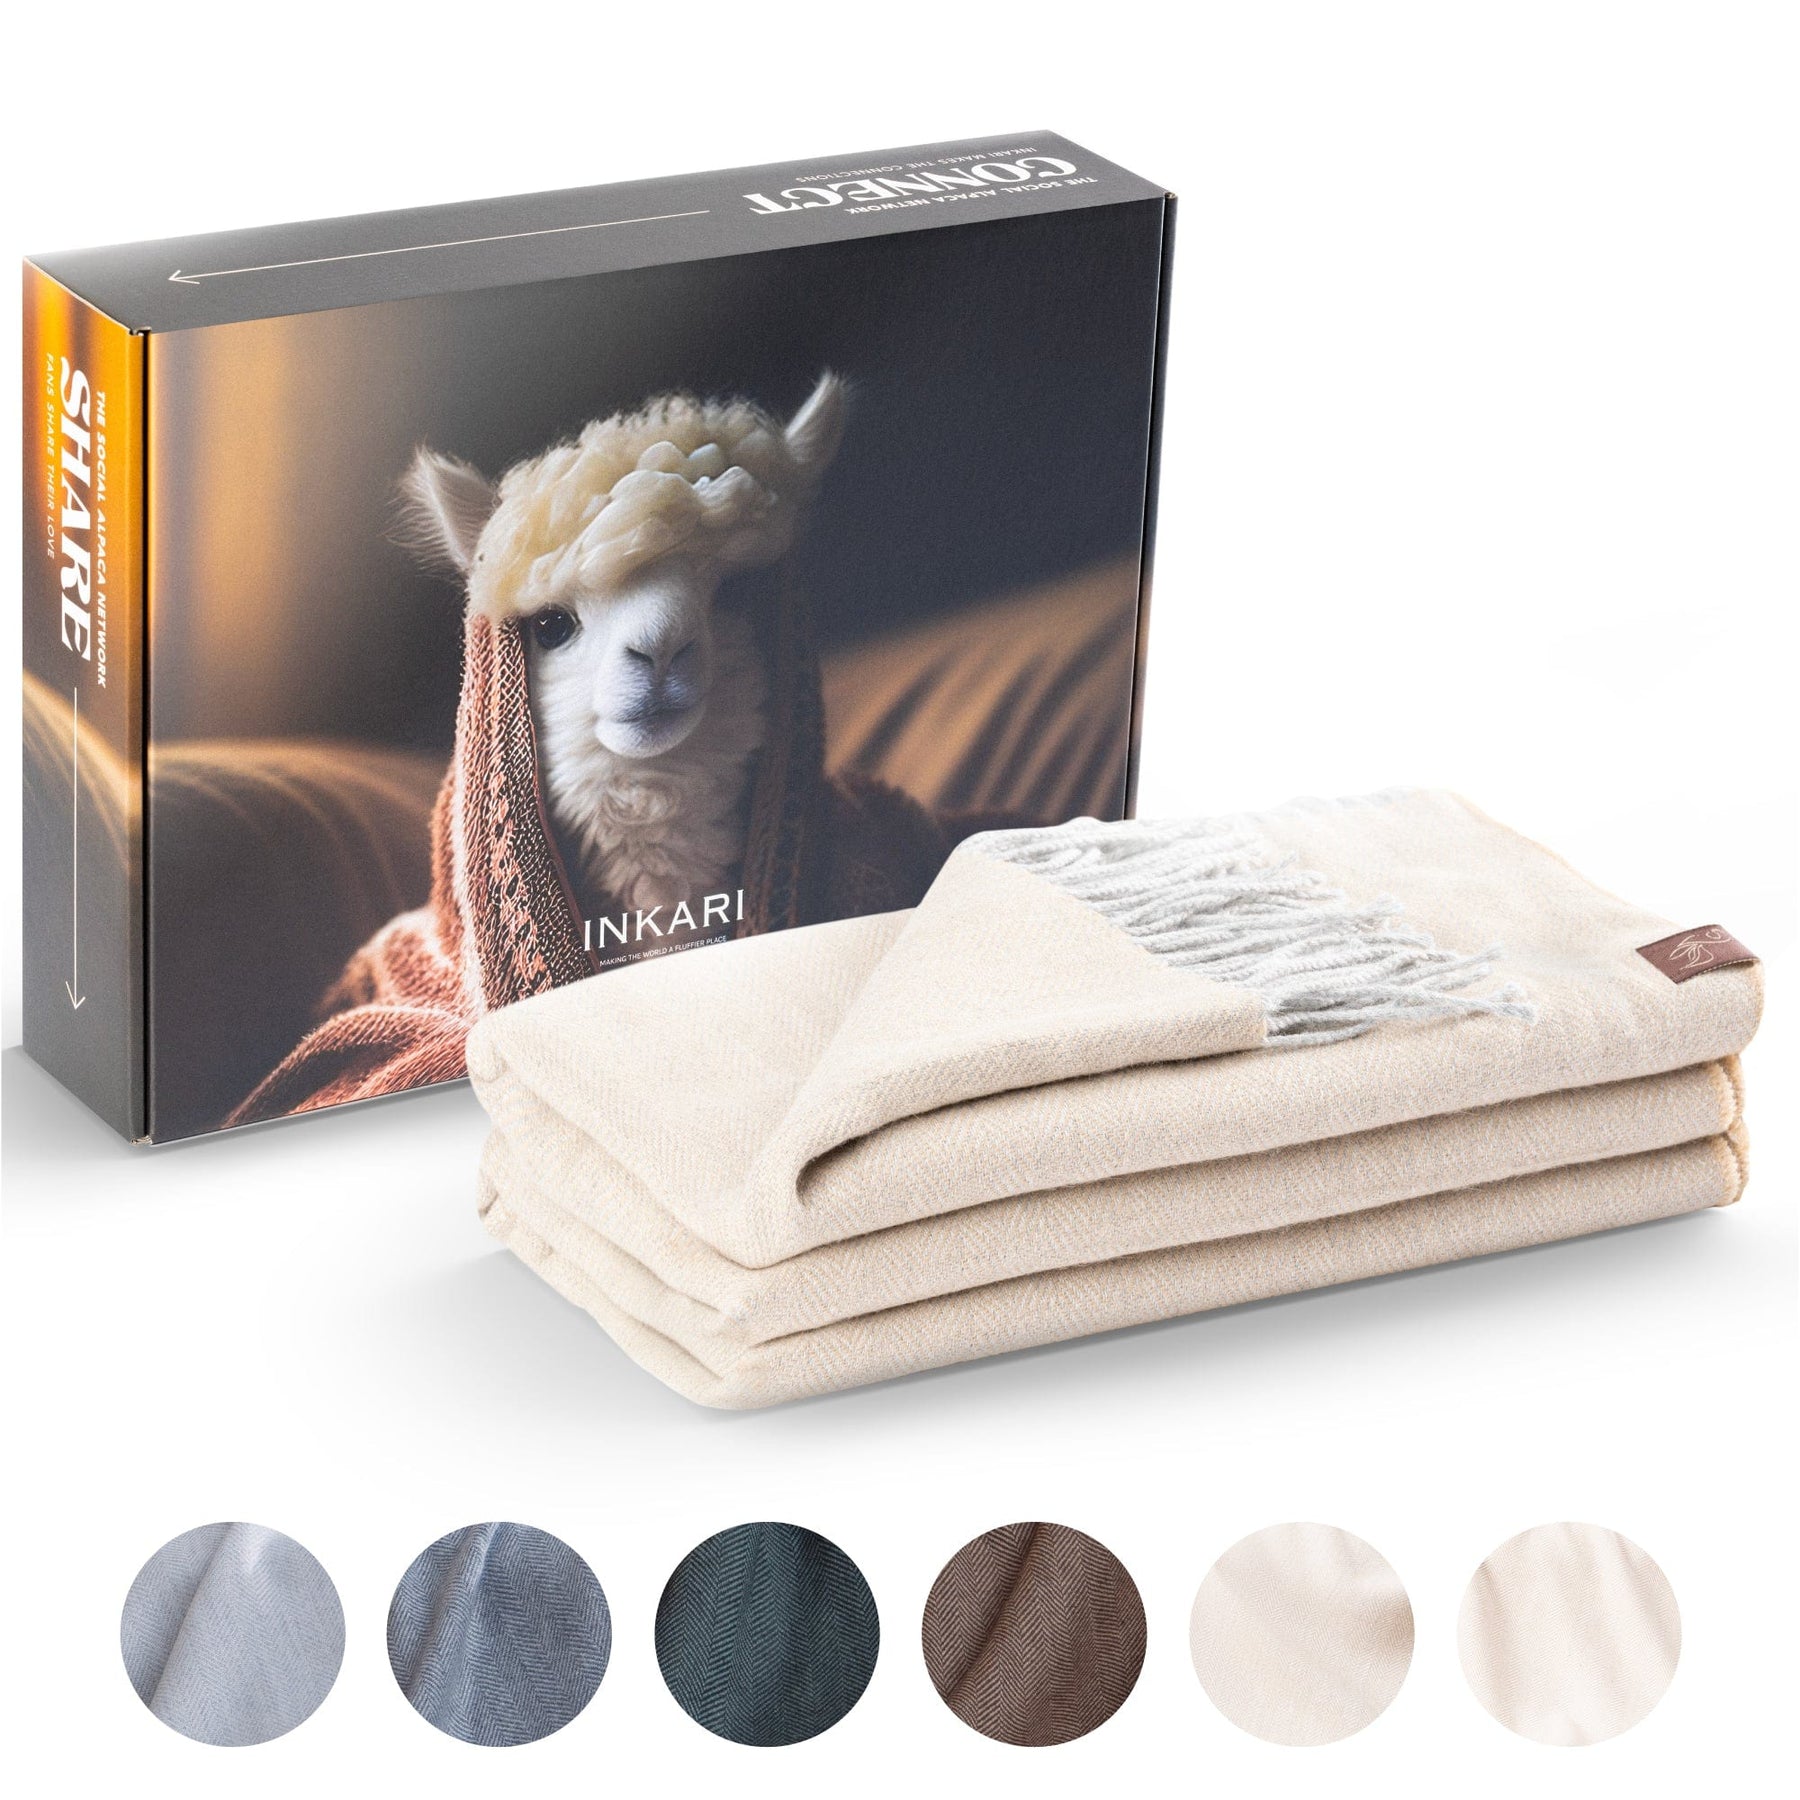 Amazing Alpaca: Wool Of The Andes – Cultural Elements